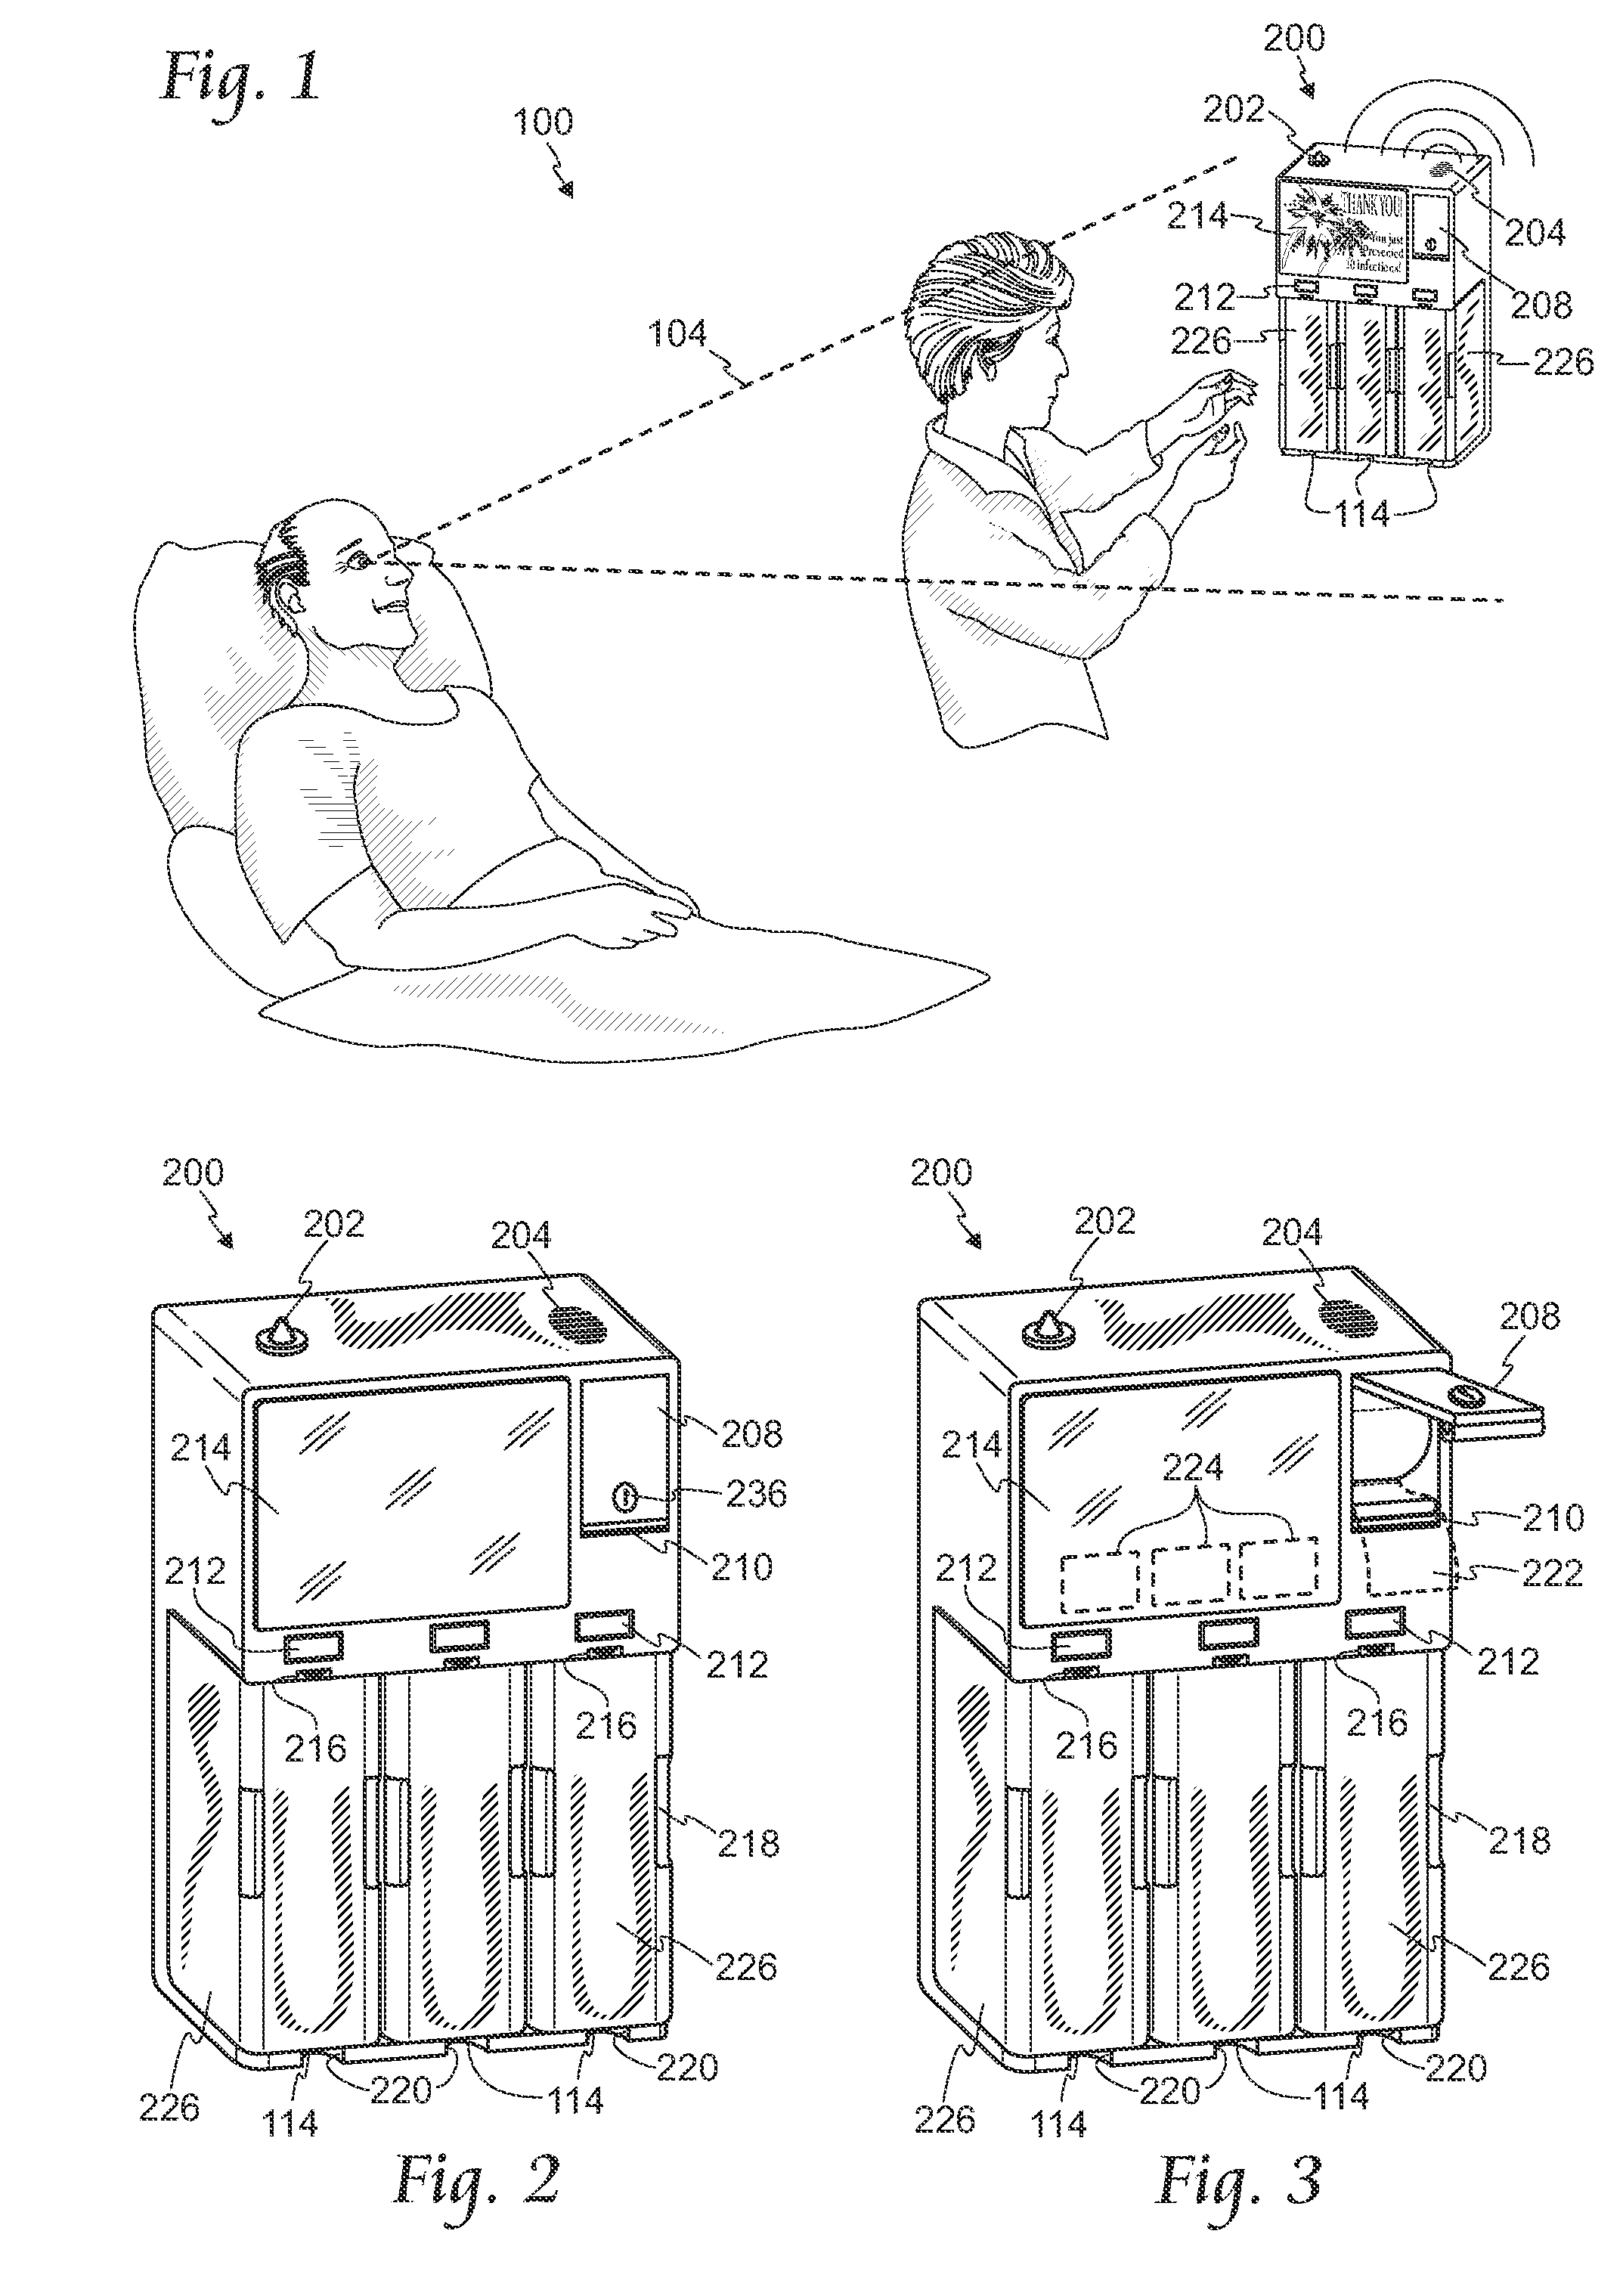 System and method for positively reinforcing hand-hygeine compliance